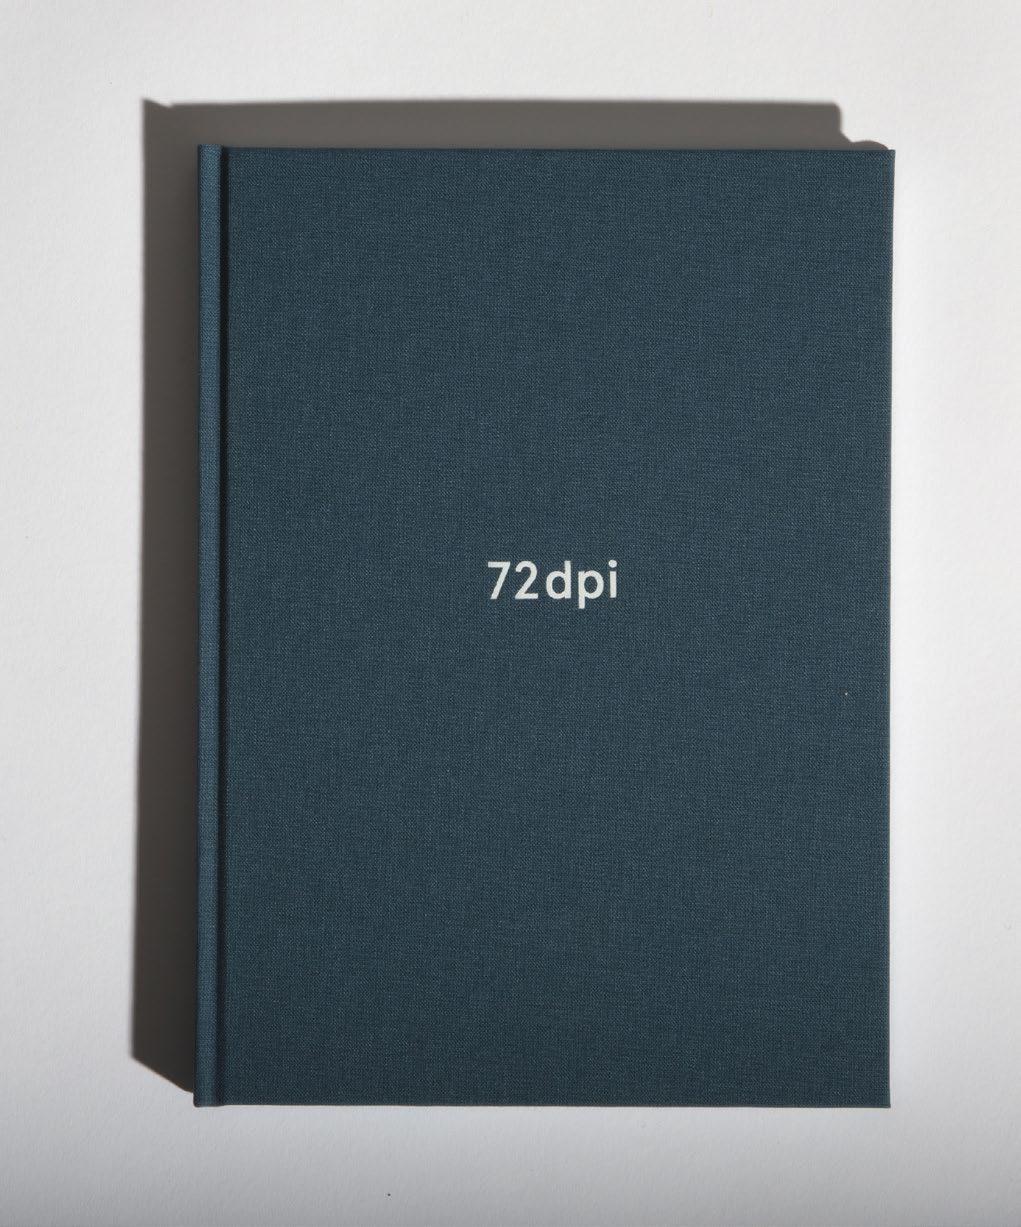 72dpi is the first book of the series and theoreatically investigates certain properties and aspects of images on the web, but reaches much further than that, all visual executions are based on it.